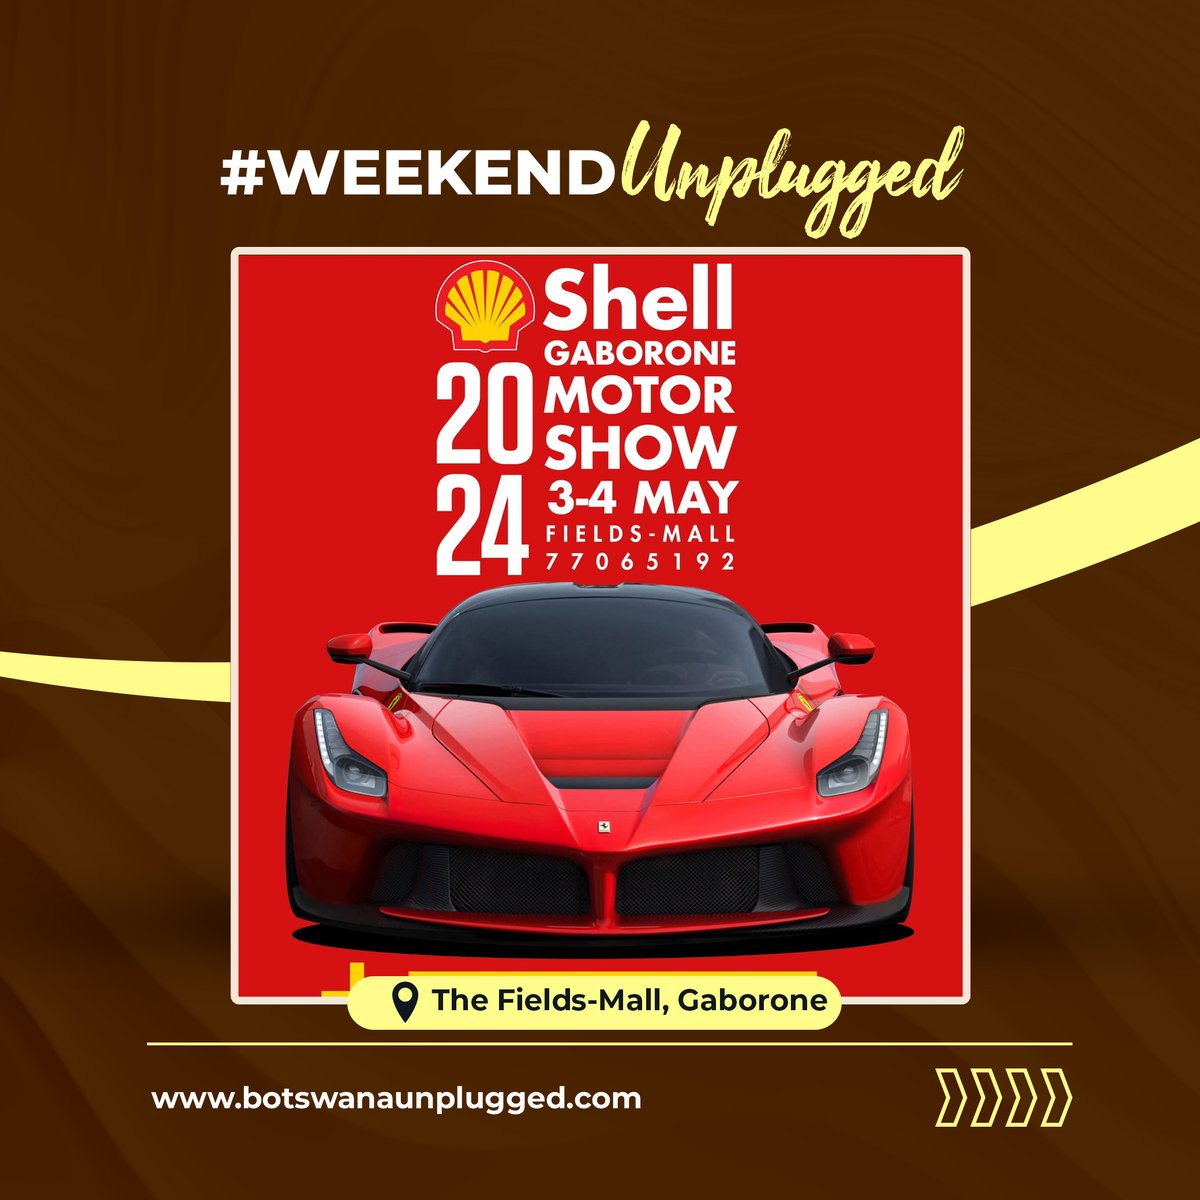 𝗢𝗡 𝗙𝗥𝗜𝗗𝗔𝗬𝗦, 𝗪𝗘 𝗨𝗡𝗣𝗟𝗨𝗚🔌🔌🔌!:This weekend is hella packed with AWESOME events for you to jump in on and you know we got you 😉👇. From the thrilling Khawa dunes to the electrifying carshow, you have a lot to look forward to😎!

#unpluggedweekends #gigguide